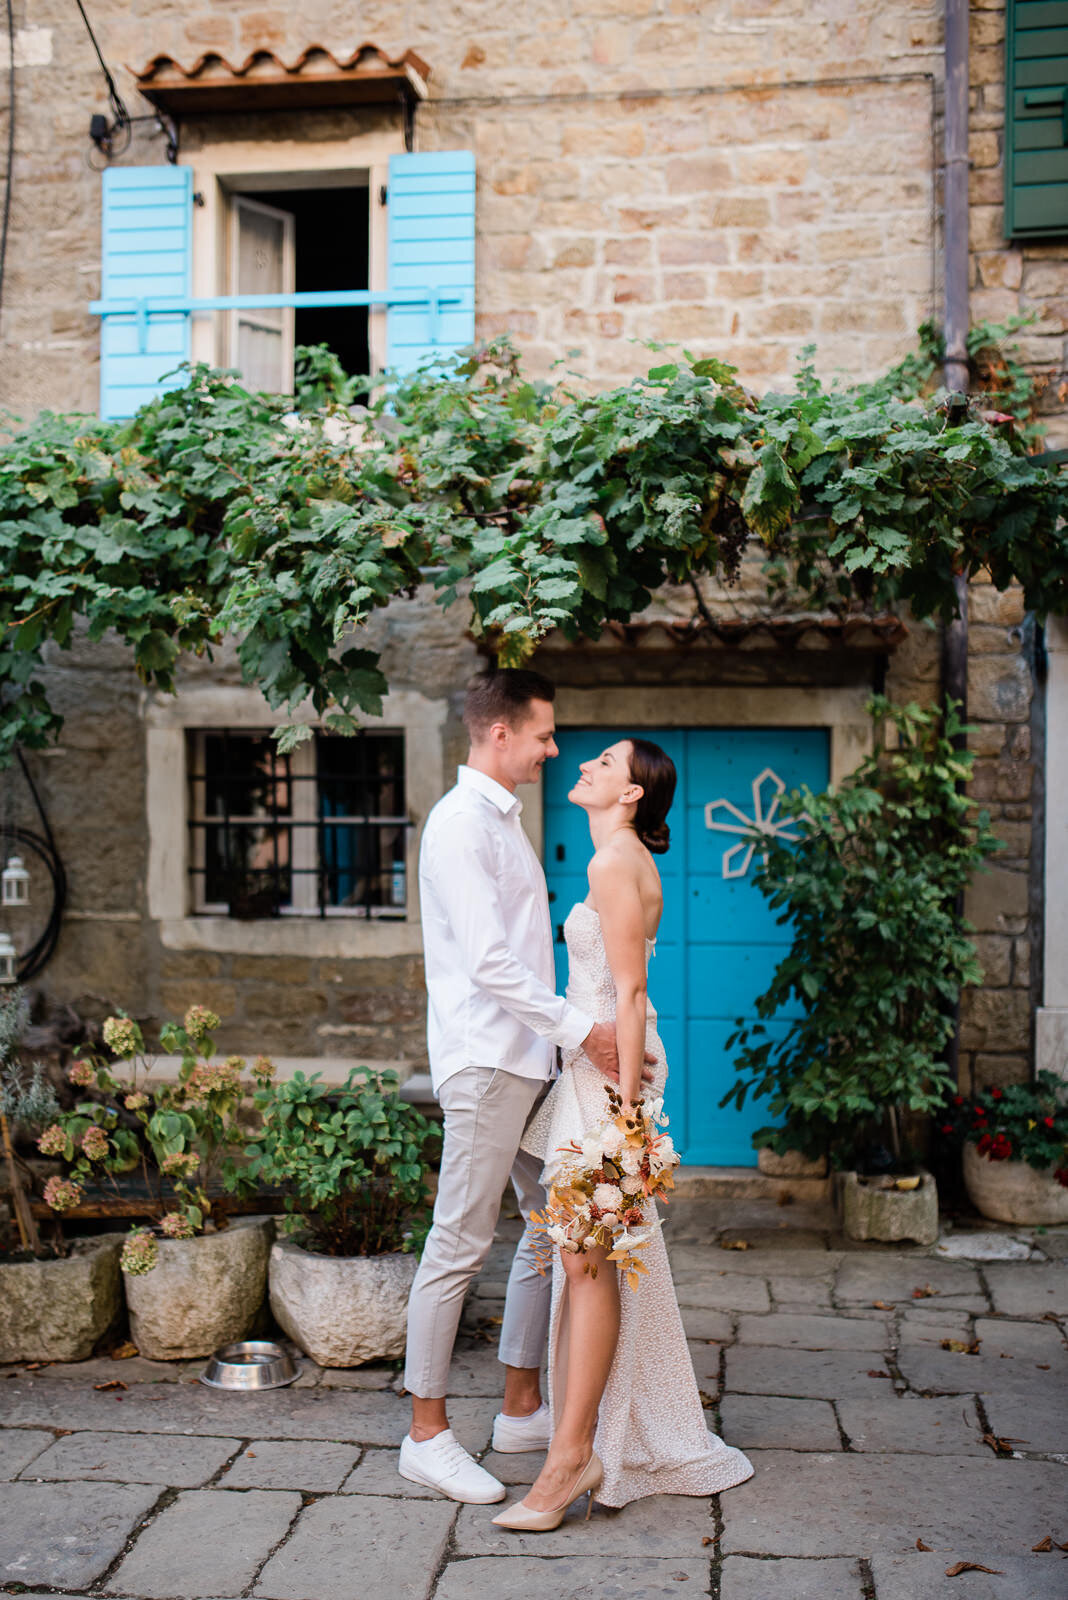 wedding couple holding bouquet standing in front of rustic house with vines and turquoise door and shutters